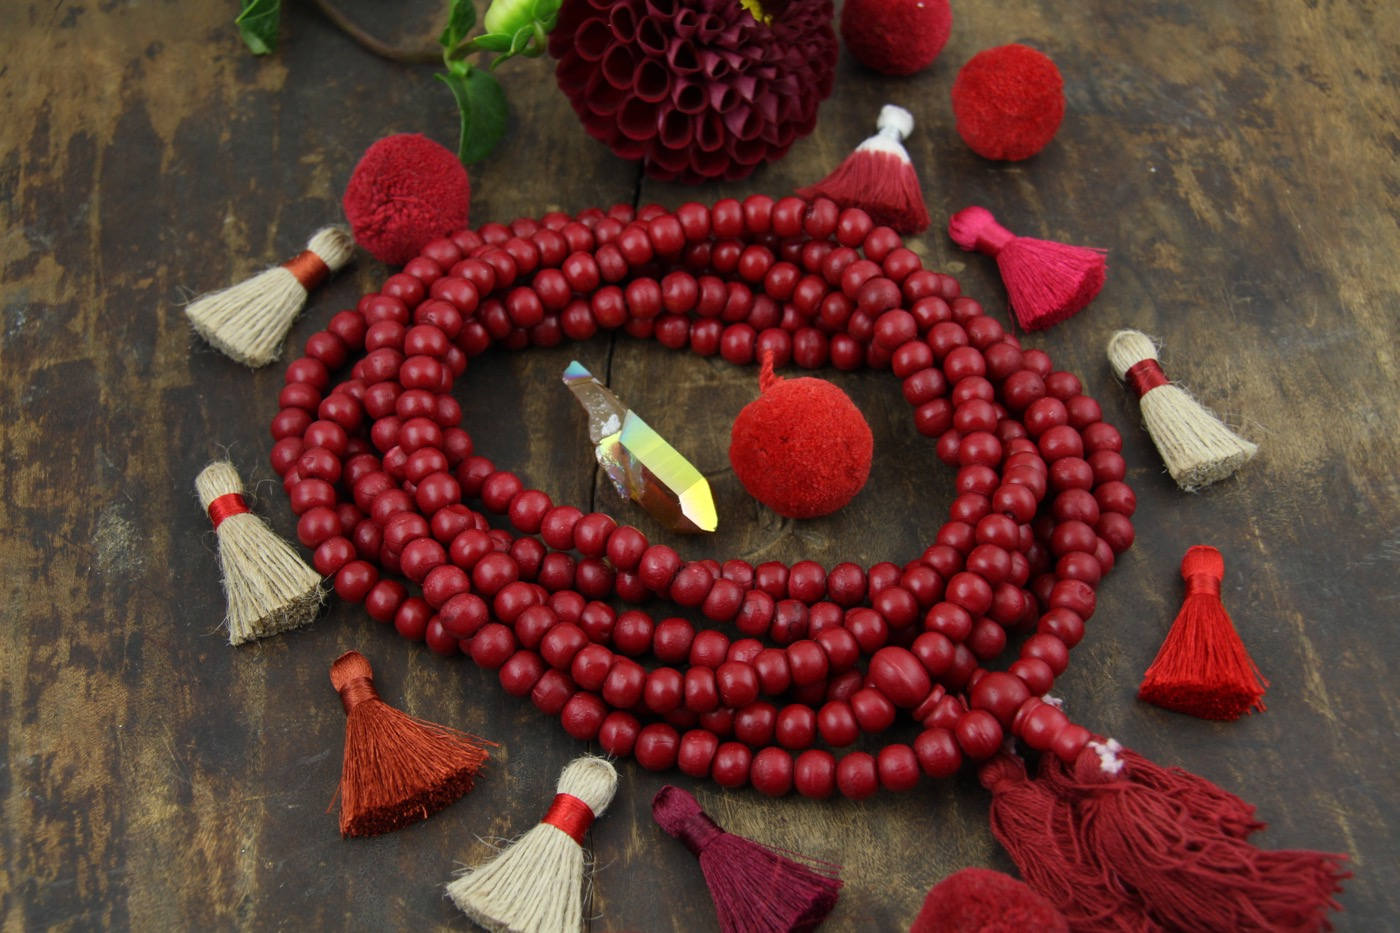 108 beads, Exclusive Color, Boho Yoga Jewelry Making Supply